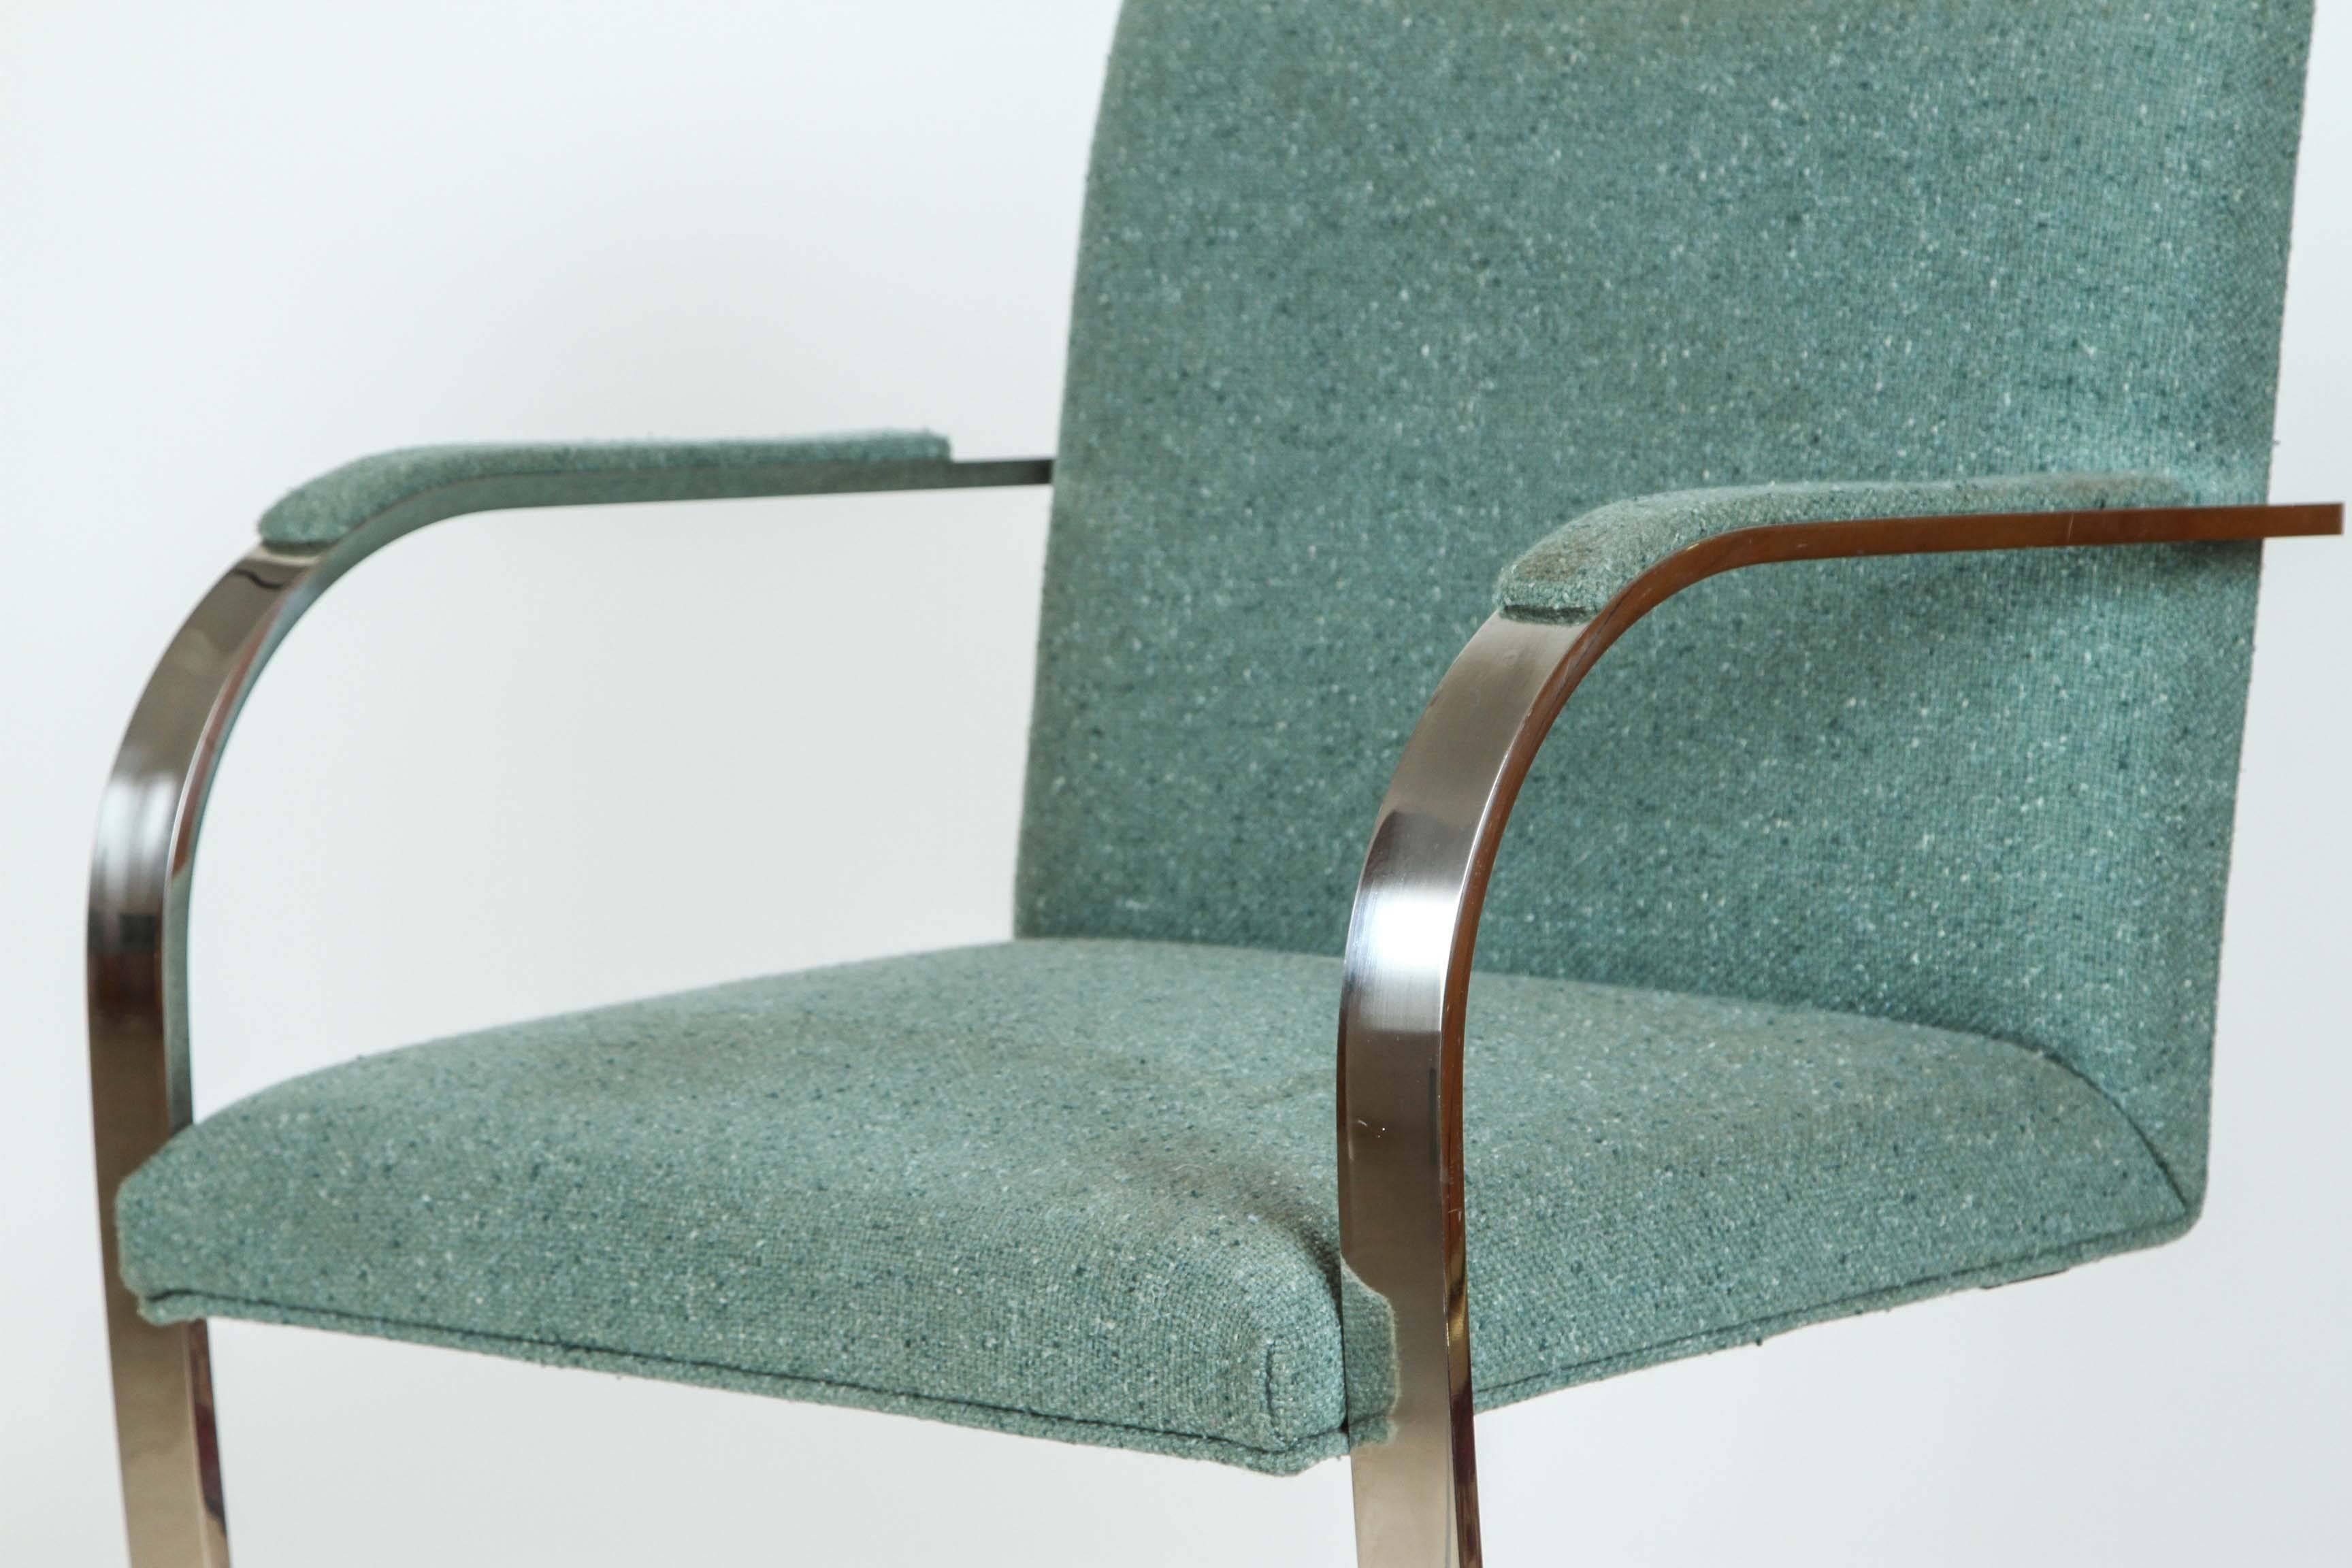 Pair of Ludwig Mies Van Der Rohe style flat bar chairs.
Polished flat stainless steel frames upholstered in a Harris wool tweed bluish color over padded seats and backs with a padded armrest for comfort.
Designed by Ludwig Mies van der Rohe and